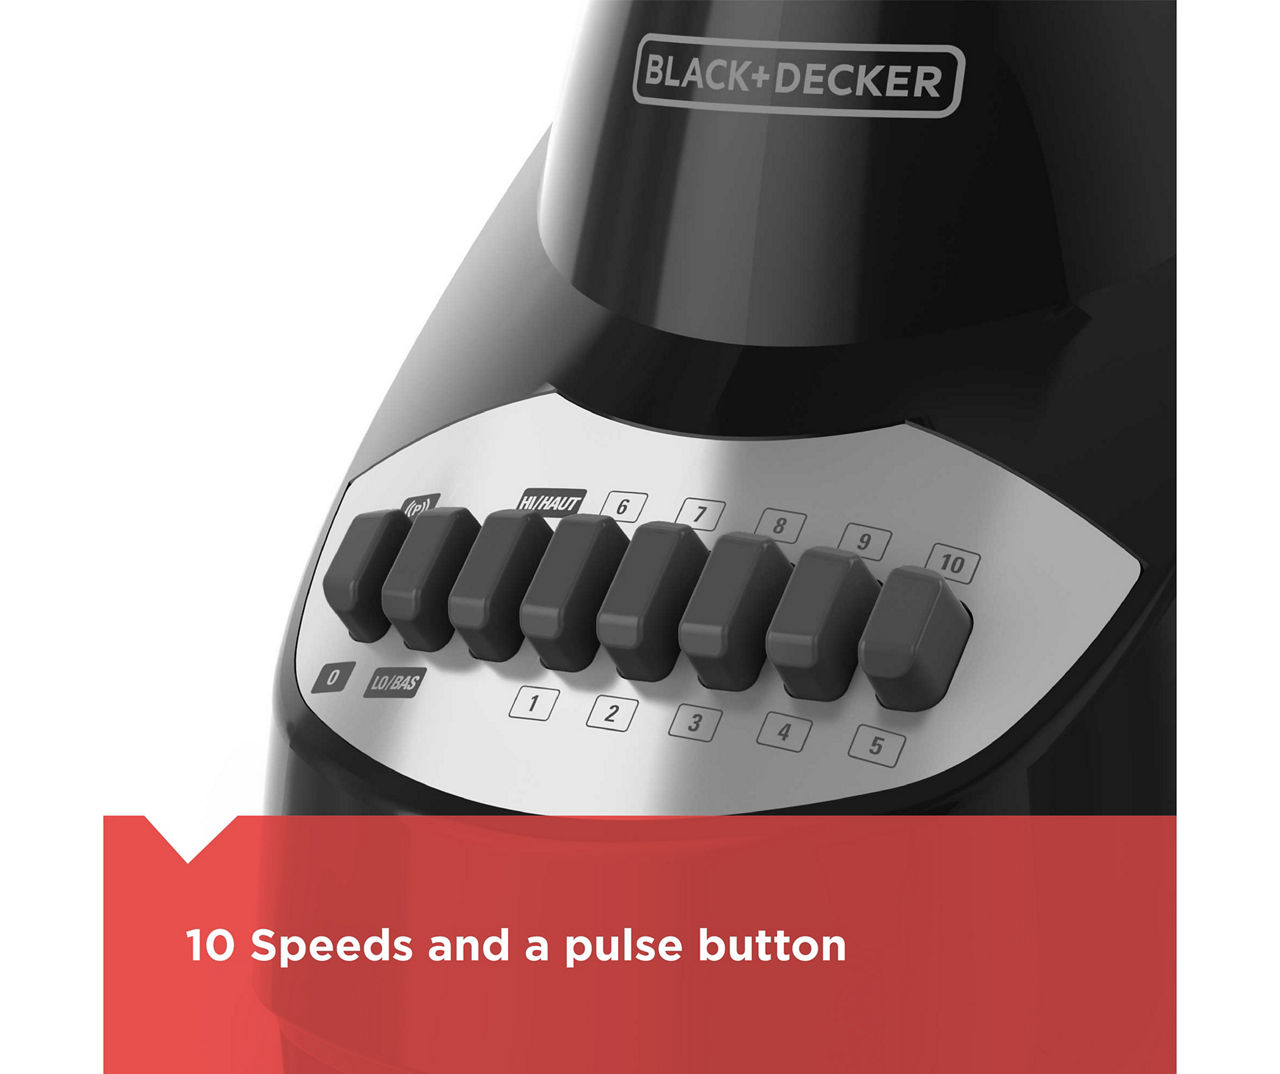 BLACK+DECKER Blender with 5 Cup glass jar how to use & Review